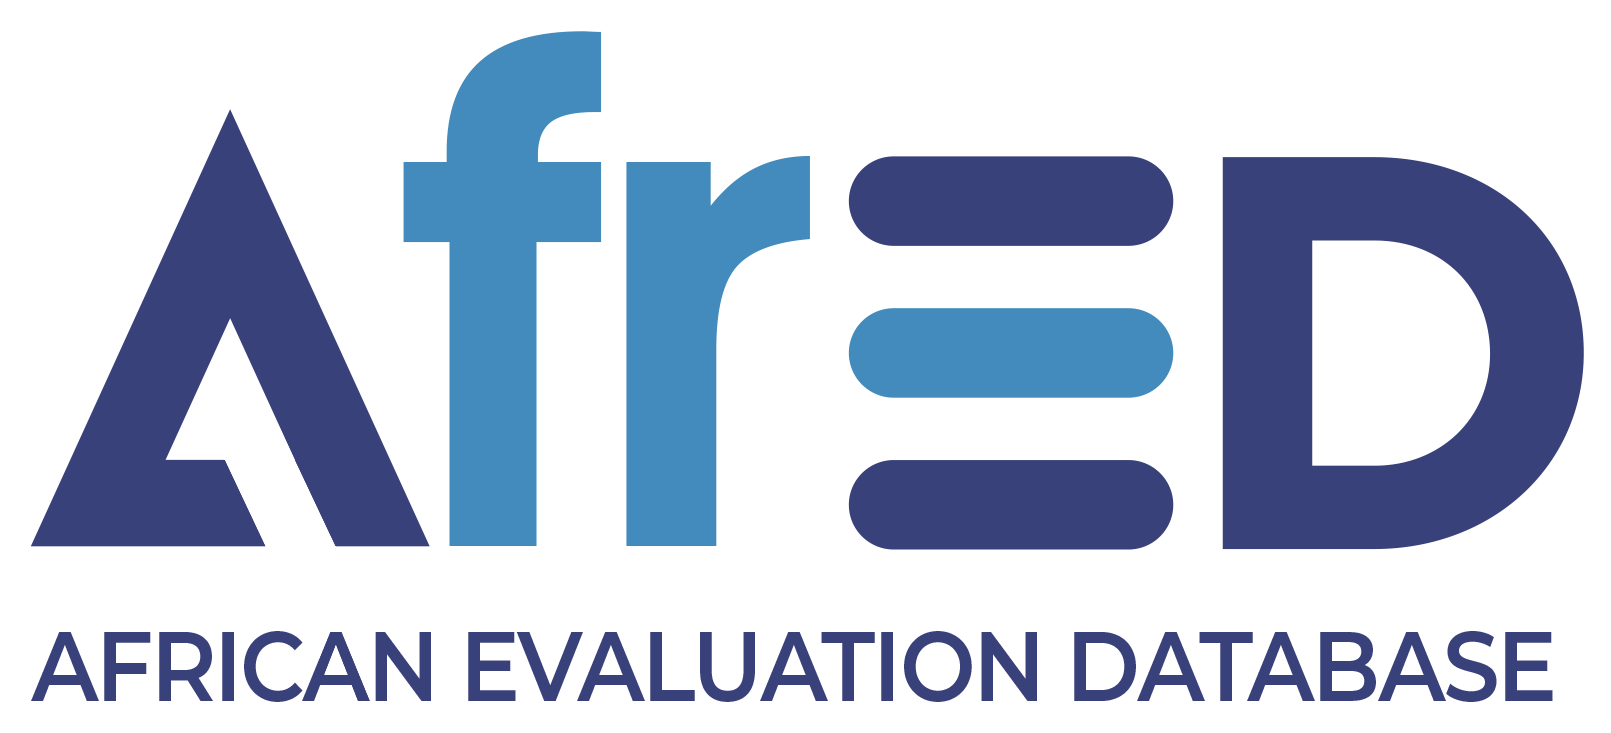 African Evaluation Database